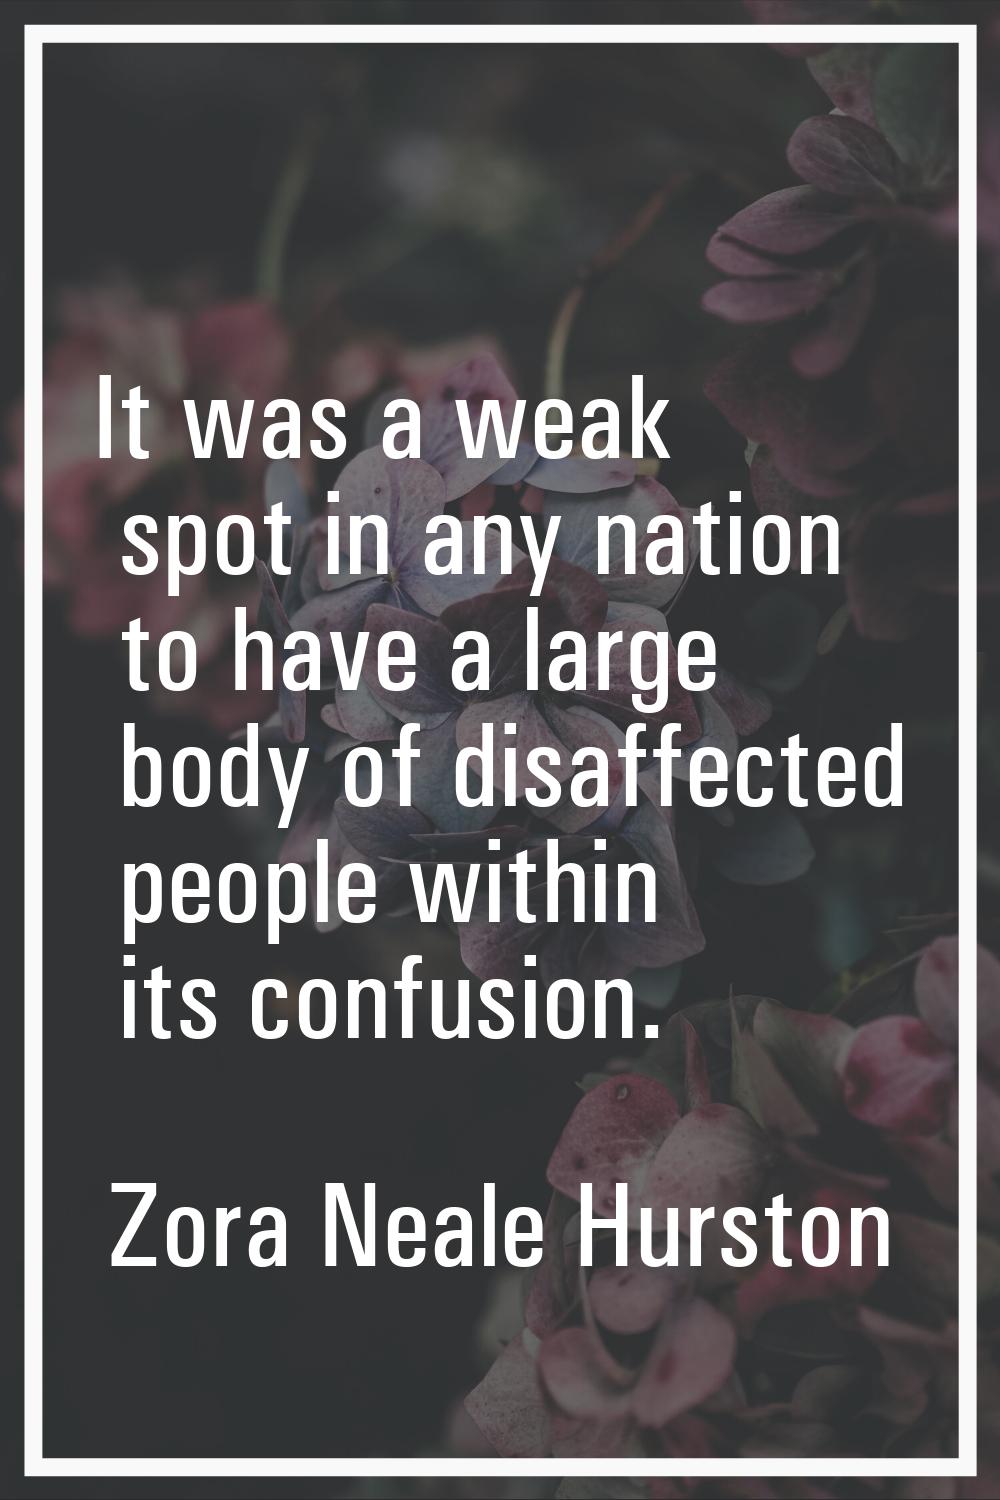 It was a weak spot in any nation to have a large body of disaffected people within its confusion.